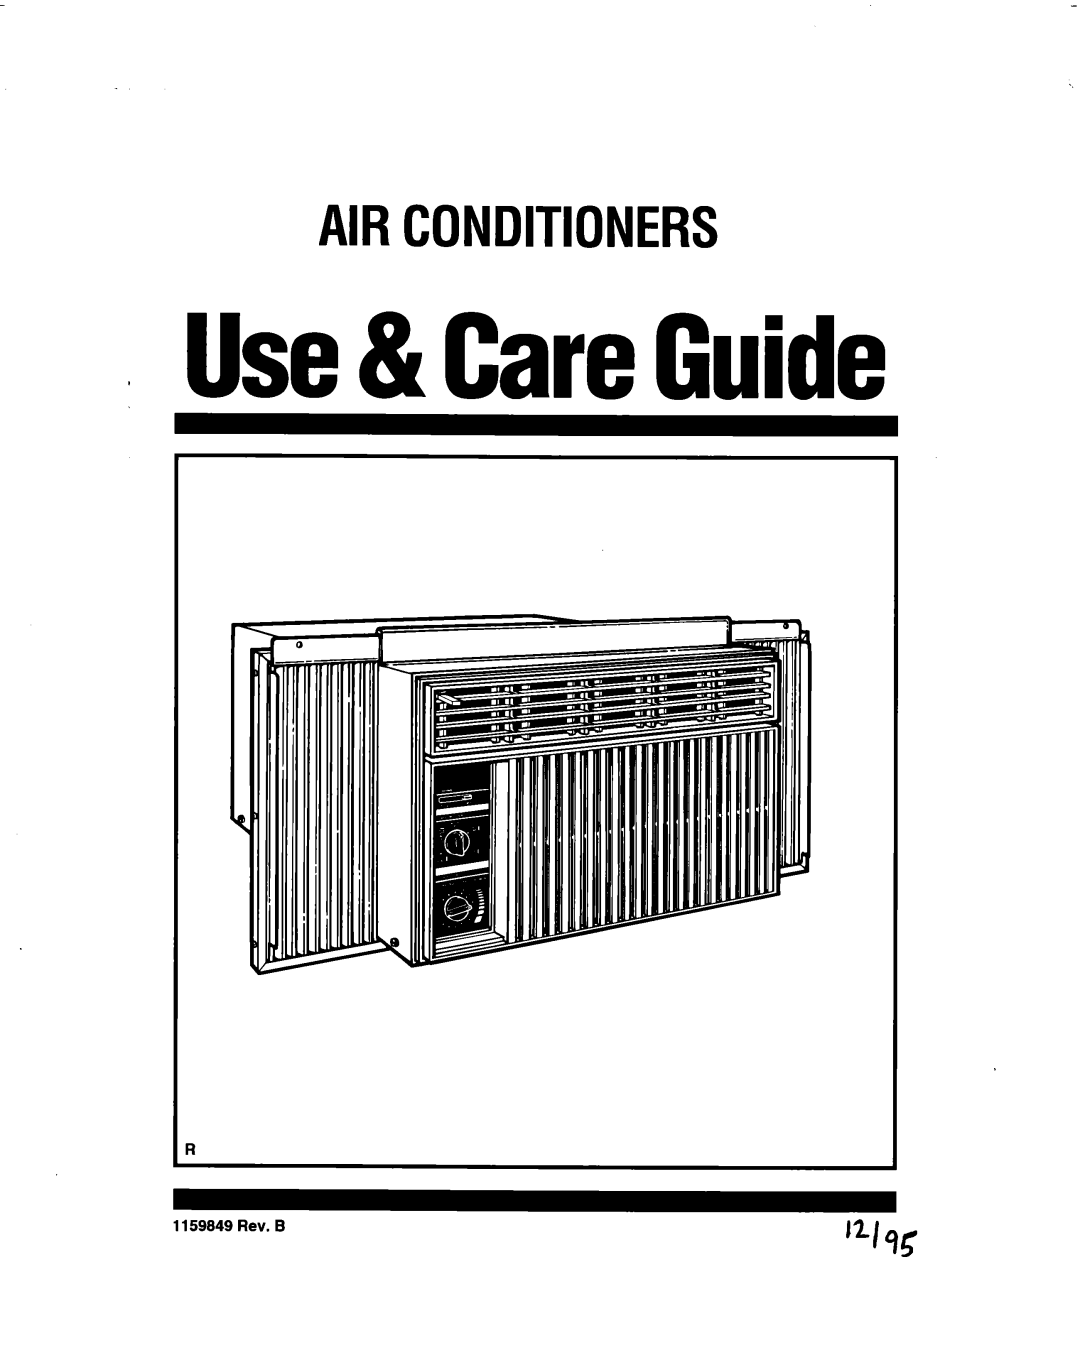 Whirlpool BHAC1000XS0 manual I Use& CareGuide, Airconditioners 